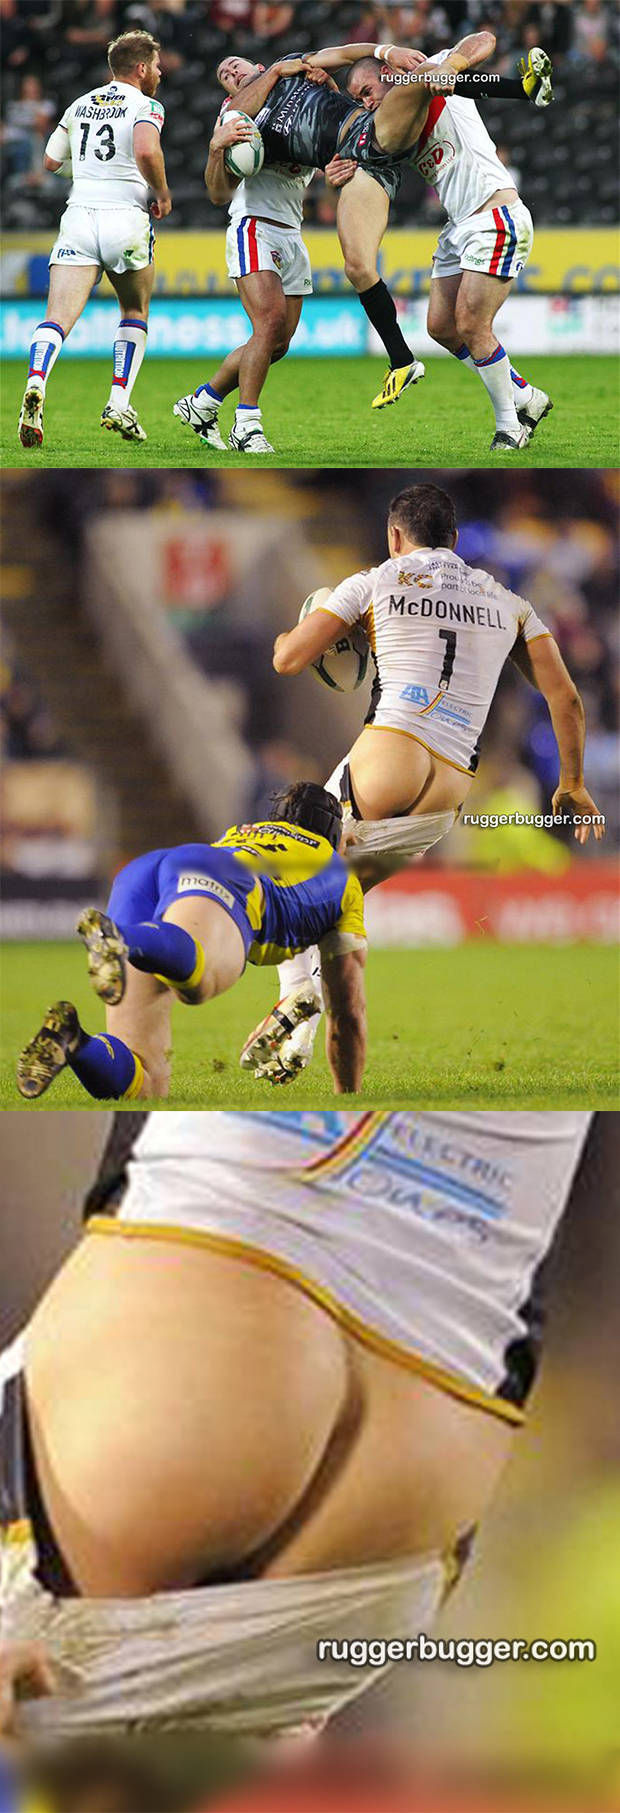 sportsmen rugby player Shannon McDonnell exposed ass